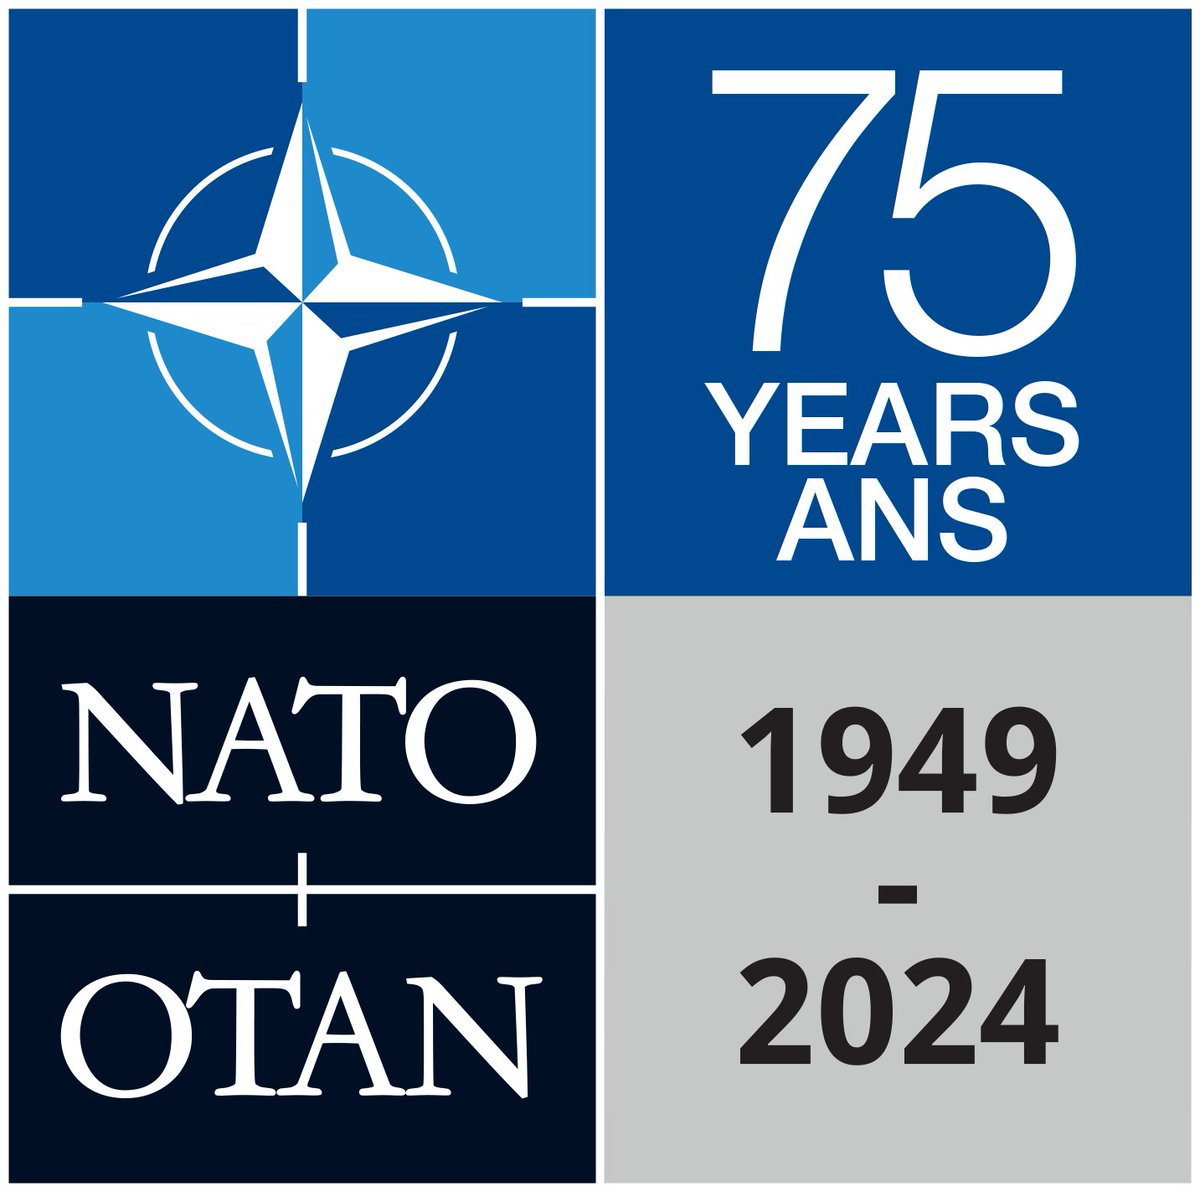 Honouring 75 years of alliance, peace and prosperity with NATO🤝🌐. As we stand united with our allies, together, we will continue to champion our shared values of democracy and security worldwide, for generations to come. 🕊️ #1NATO75years #WeAreNATO